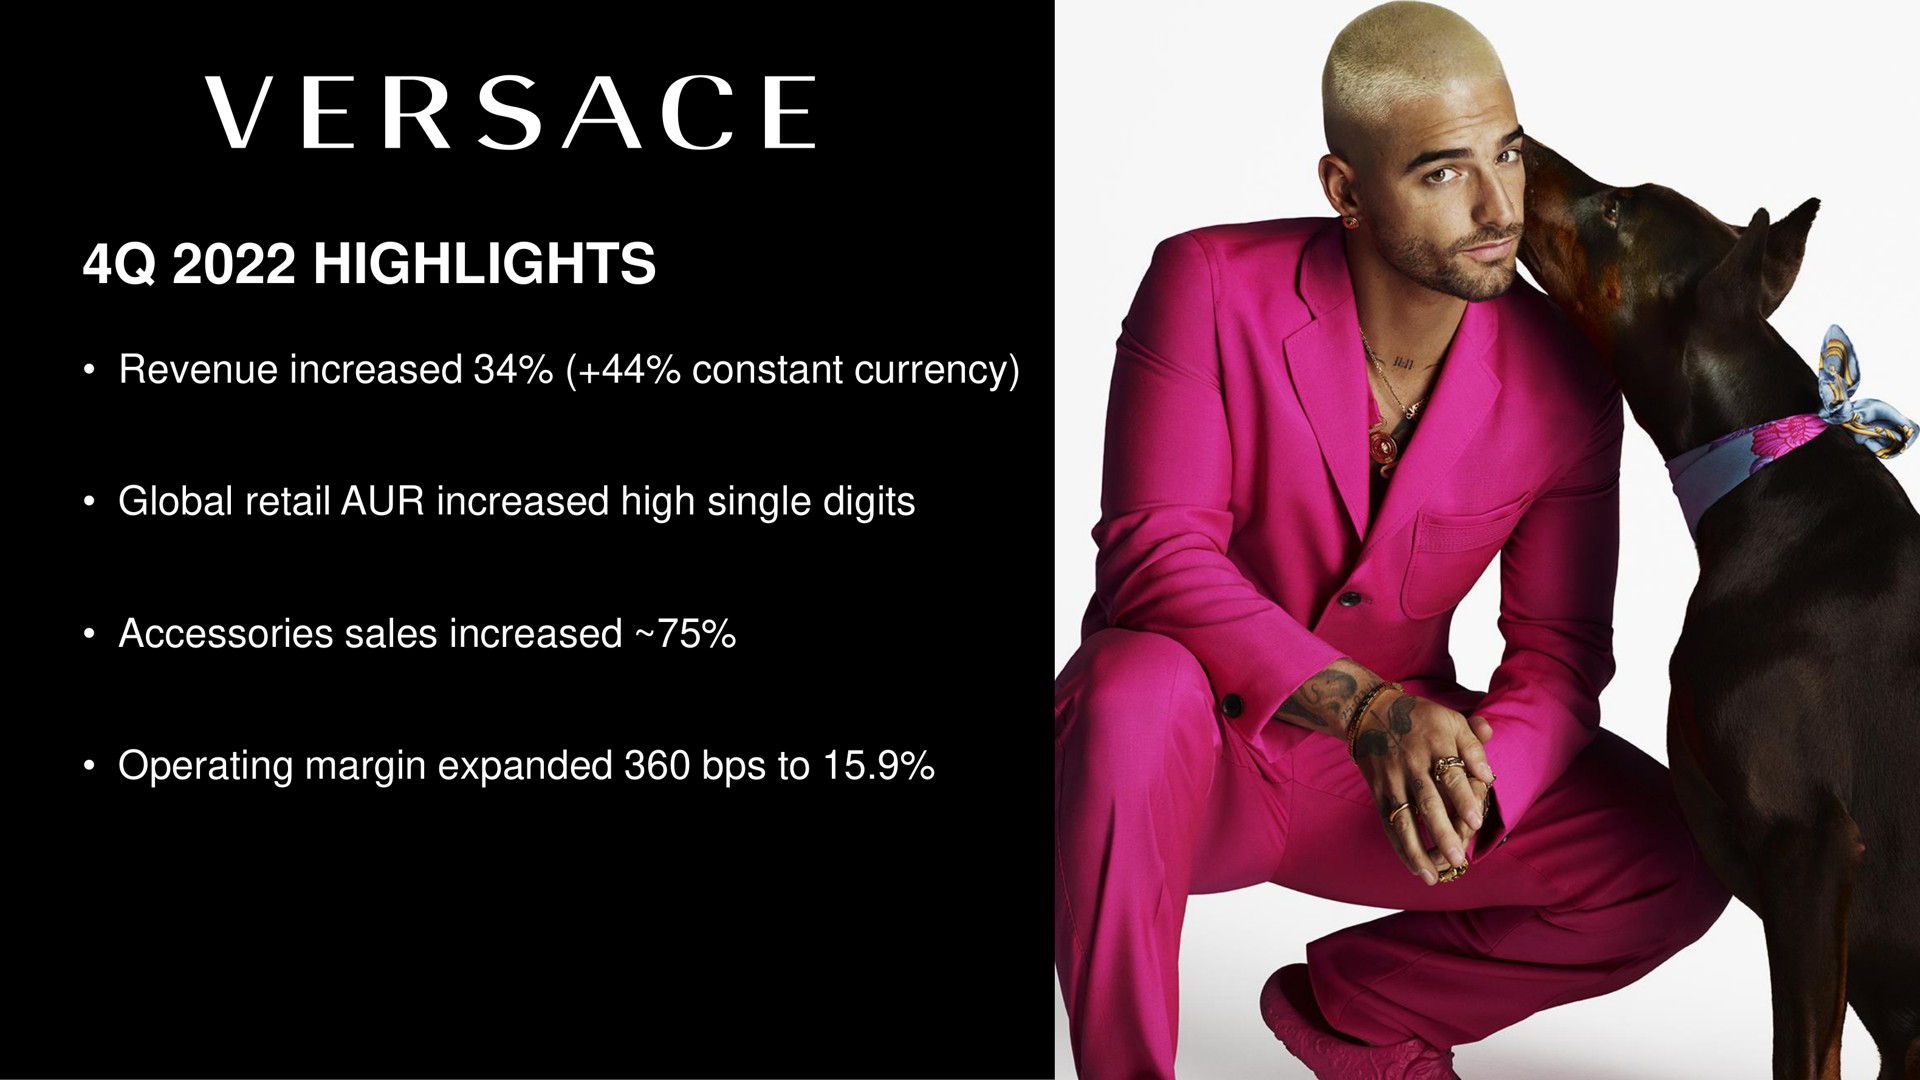 highlights revenue increased constant currency global retail increased high single digits accessories sales increased operating margin expanded to | Capri Holdings